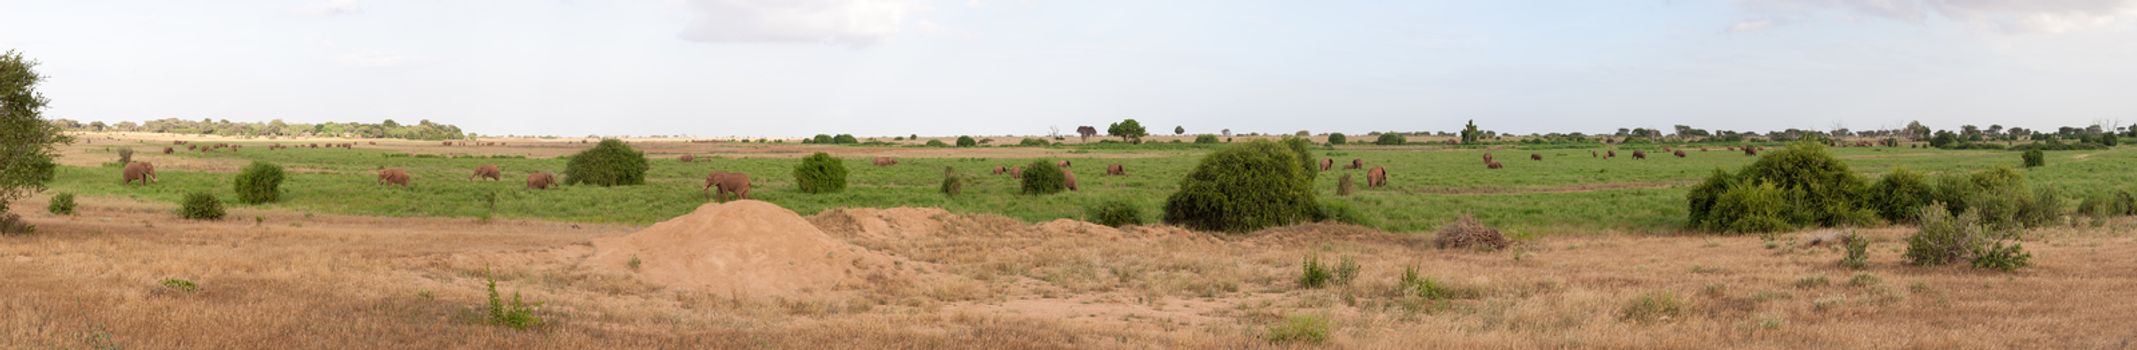 A lot of animals in the grassland of the savannah with a lot of green plants